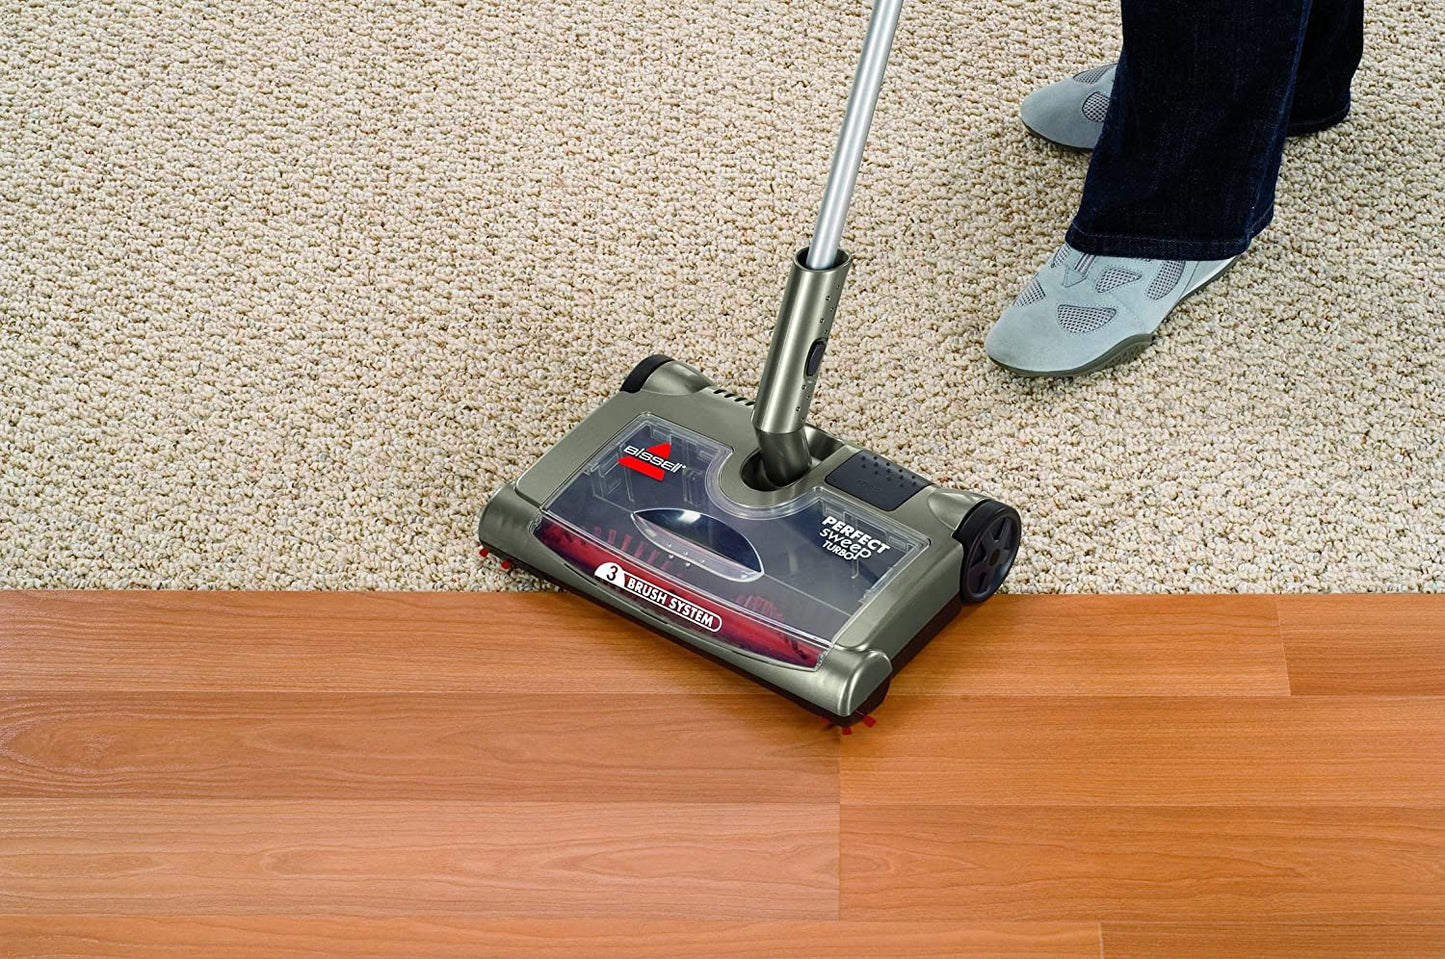 BISSELL Perfect Sweep Turbo Cordless Rechargeable Sweeper, 2880A